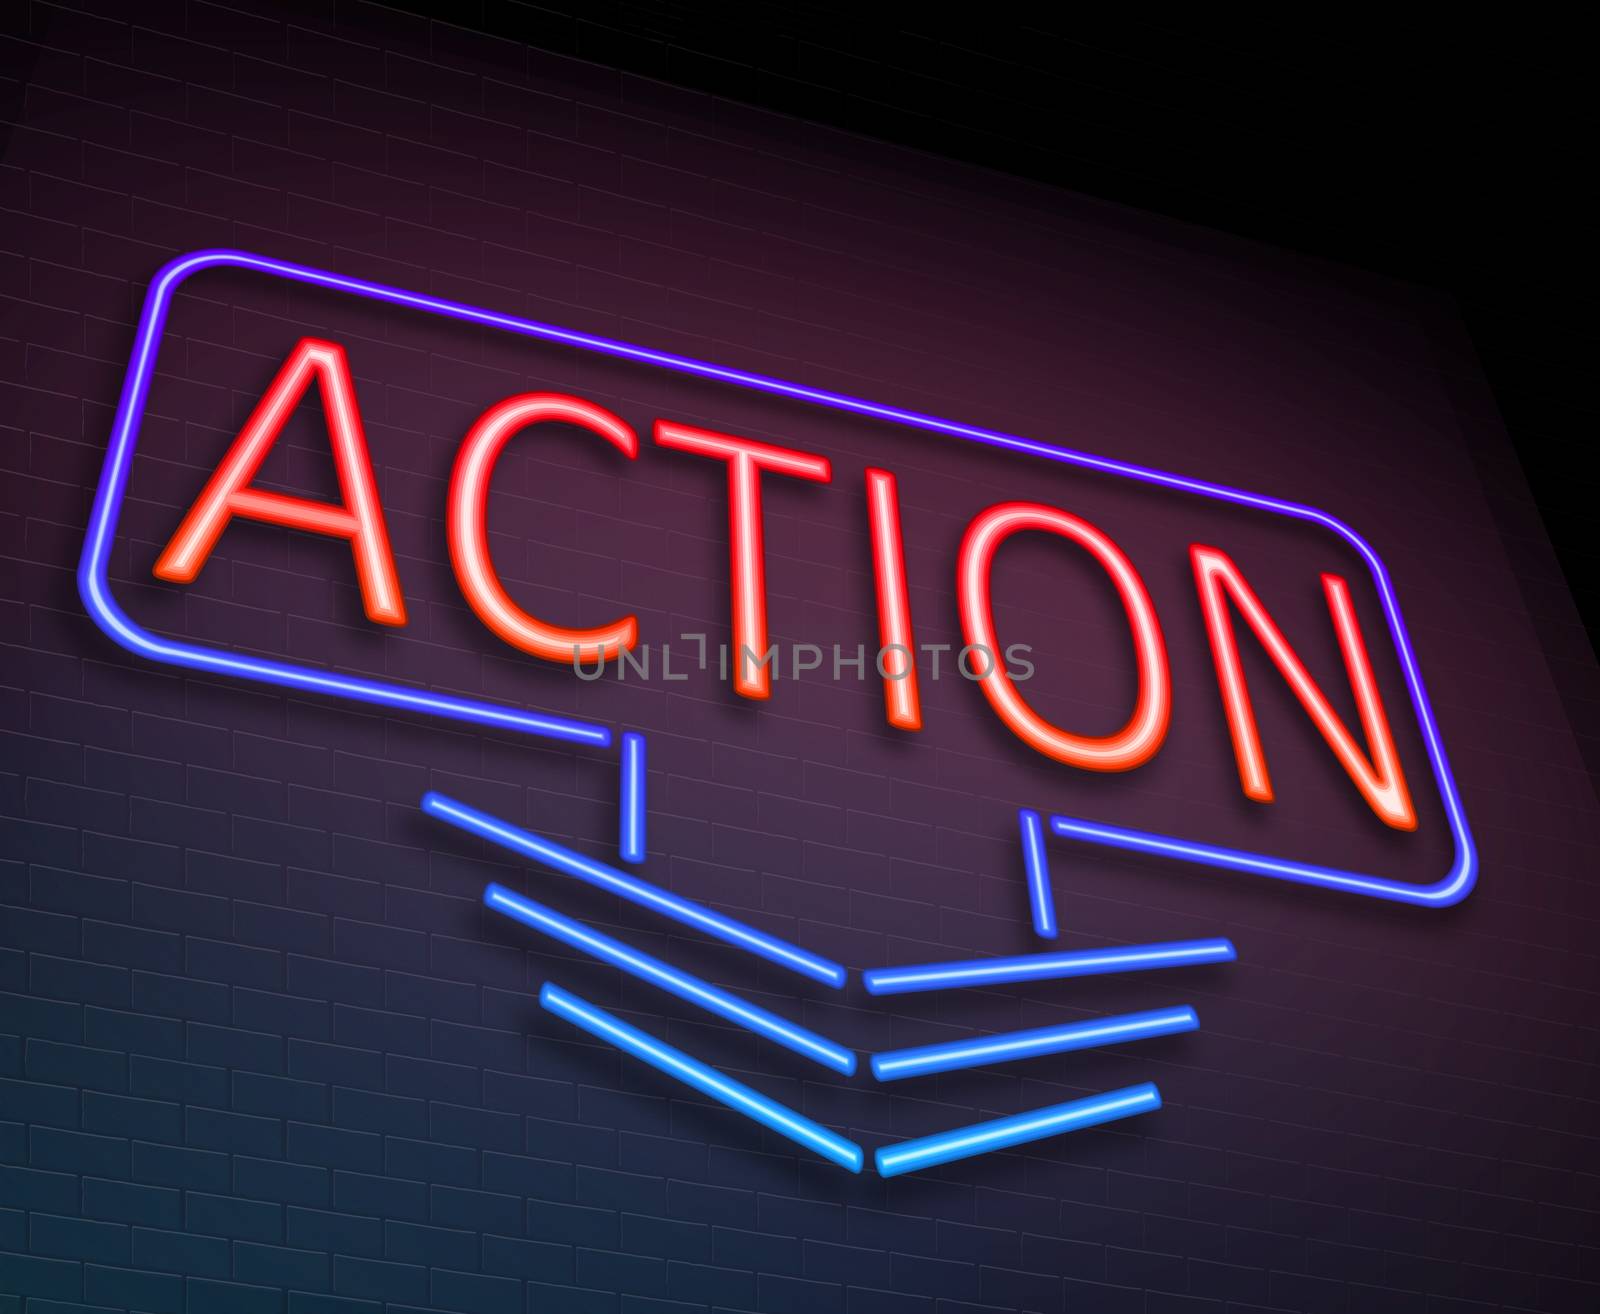 Action neon concept. by 72soul